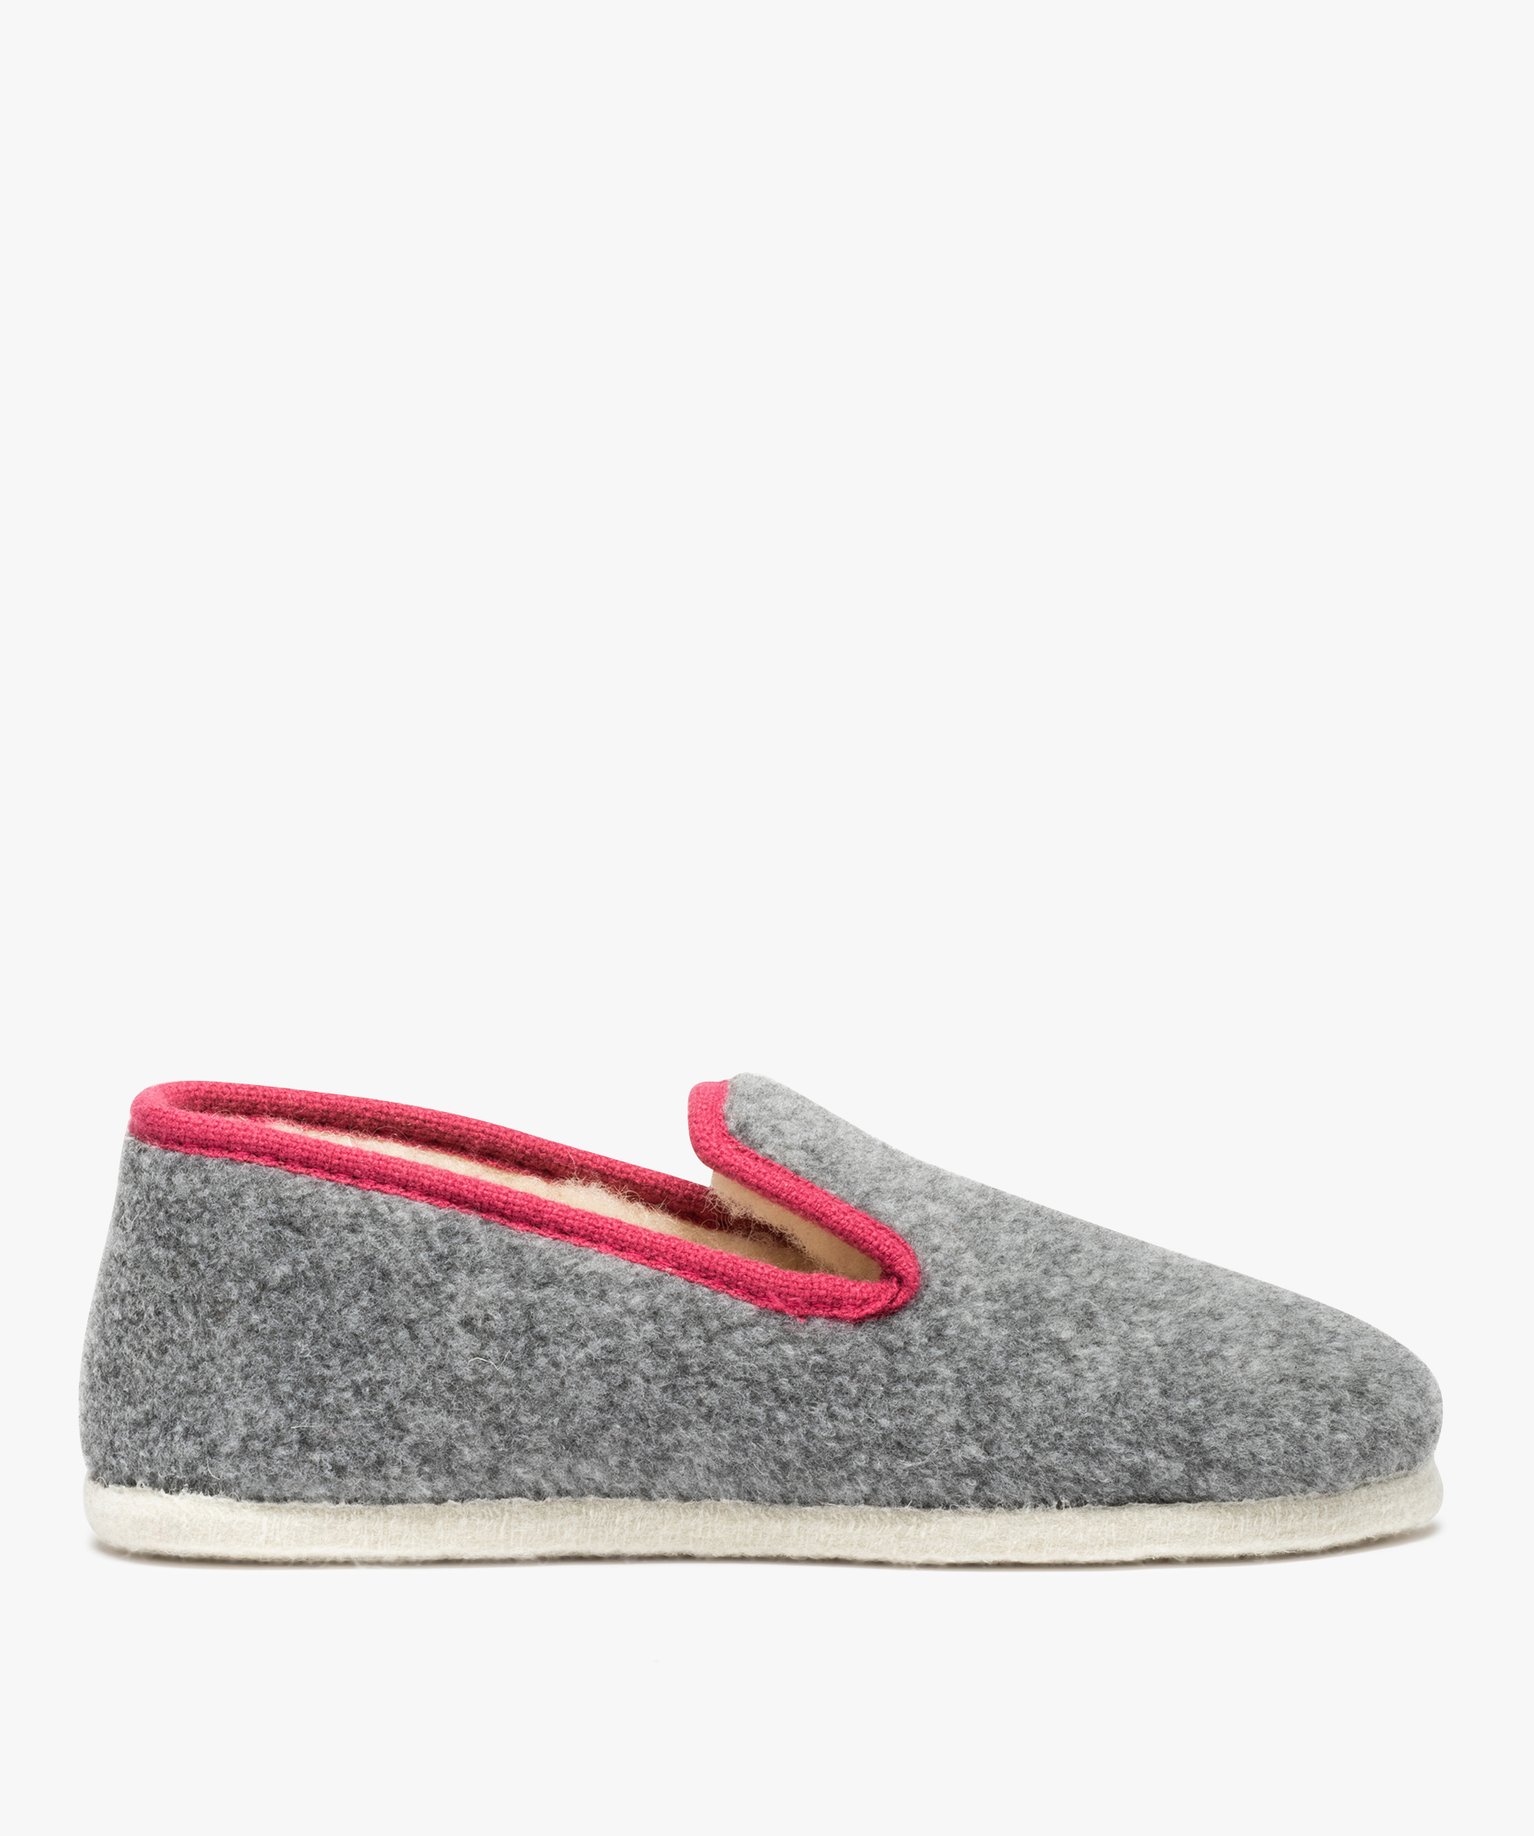 chaussons femme style charentaises bicolores gris